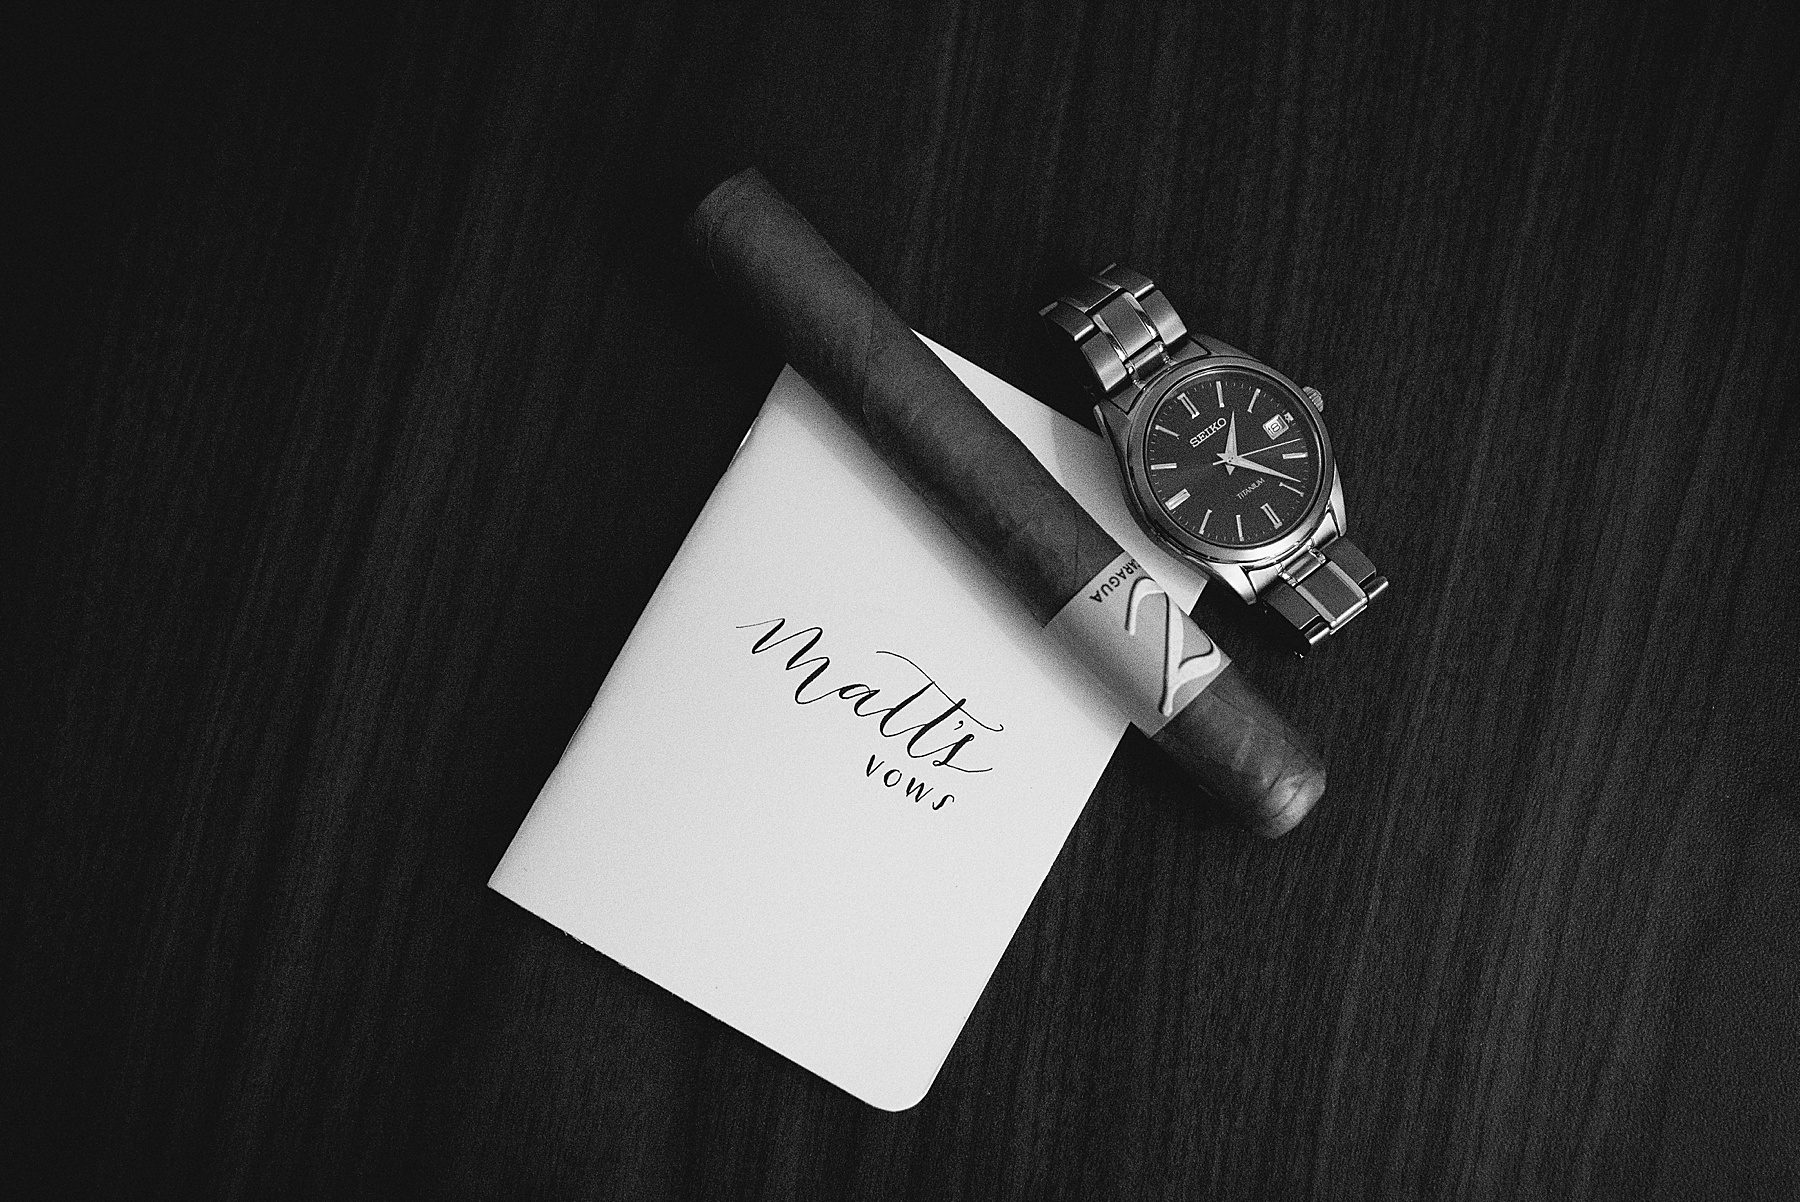 Groom's Vow Book with his watch and cigar placed on top of it for a SLO Wedding.